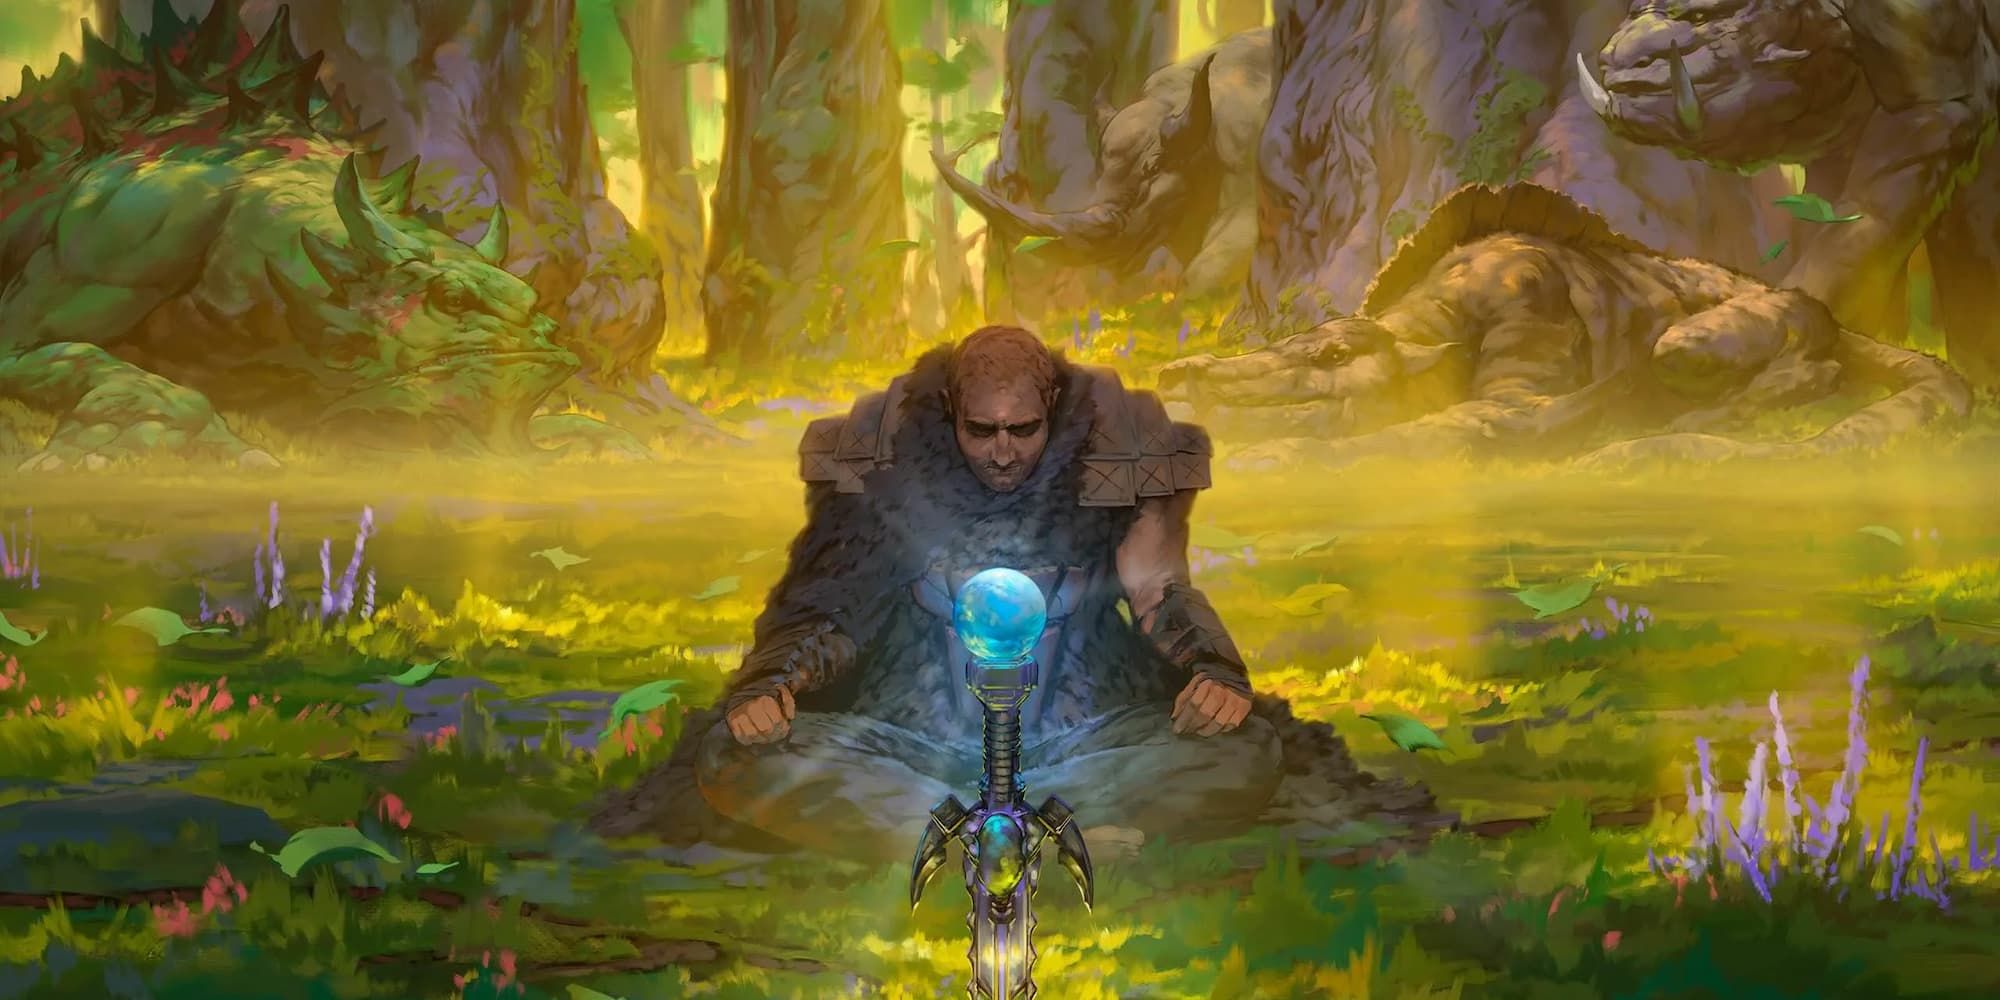 A barbarian sitting in a sunlit forest clearing, looking at a sword with a blue gem